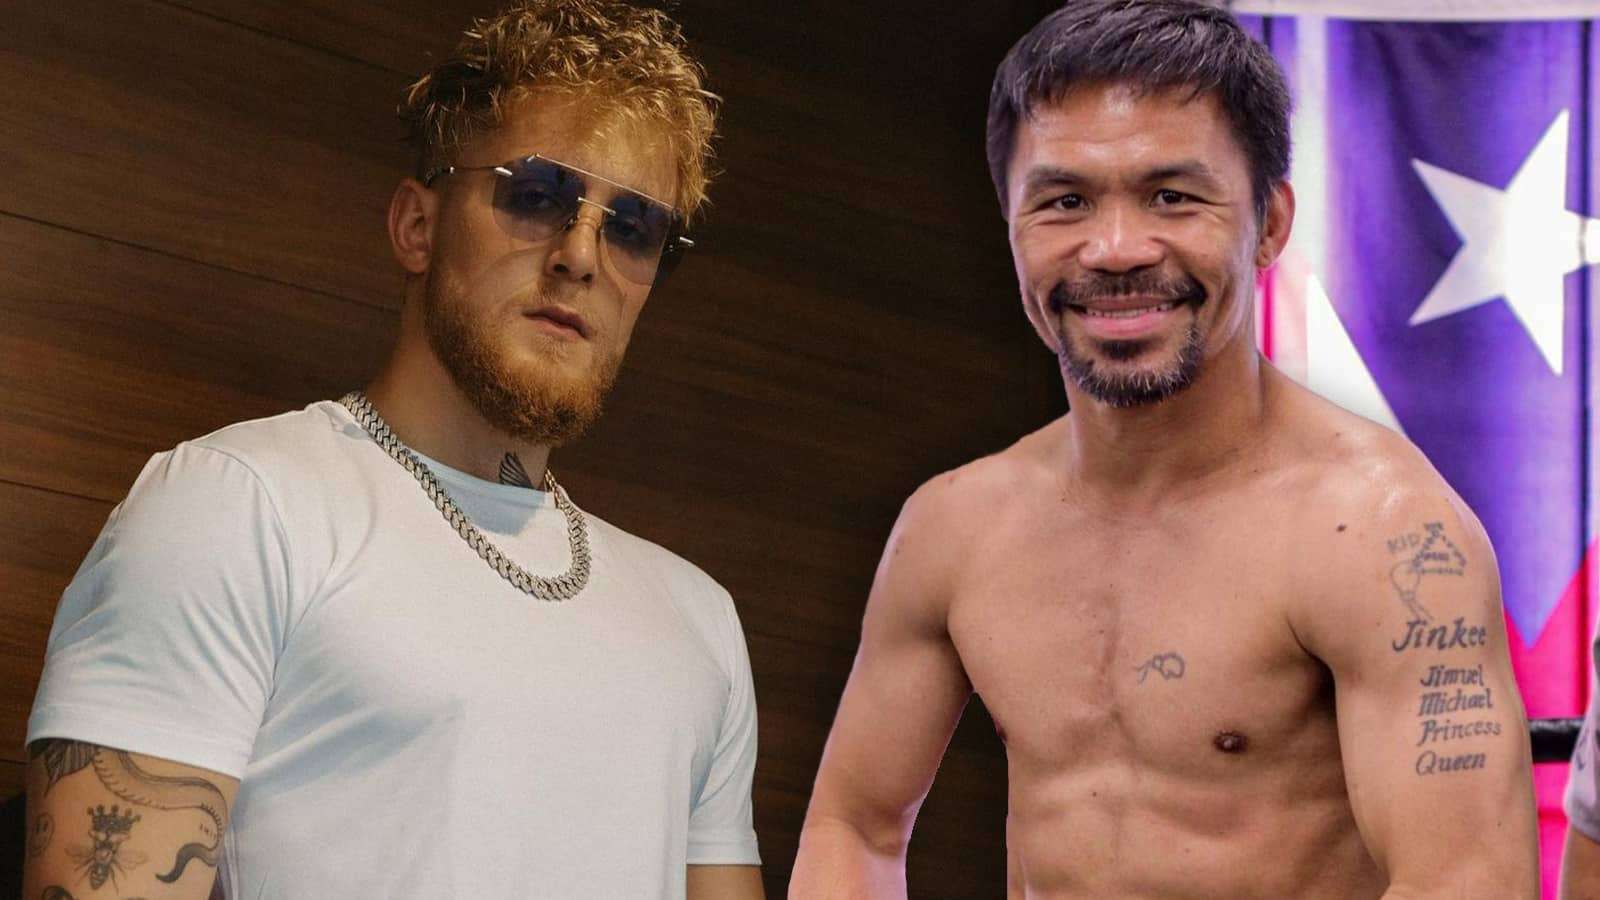 Manny Pacquiao dismisses Jake Paul fight rumors: "I want to fight the best"